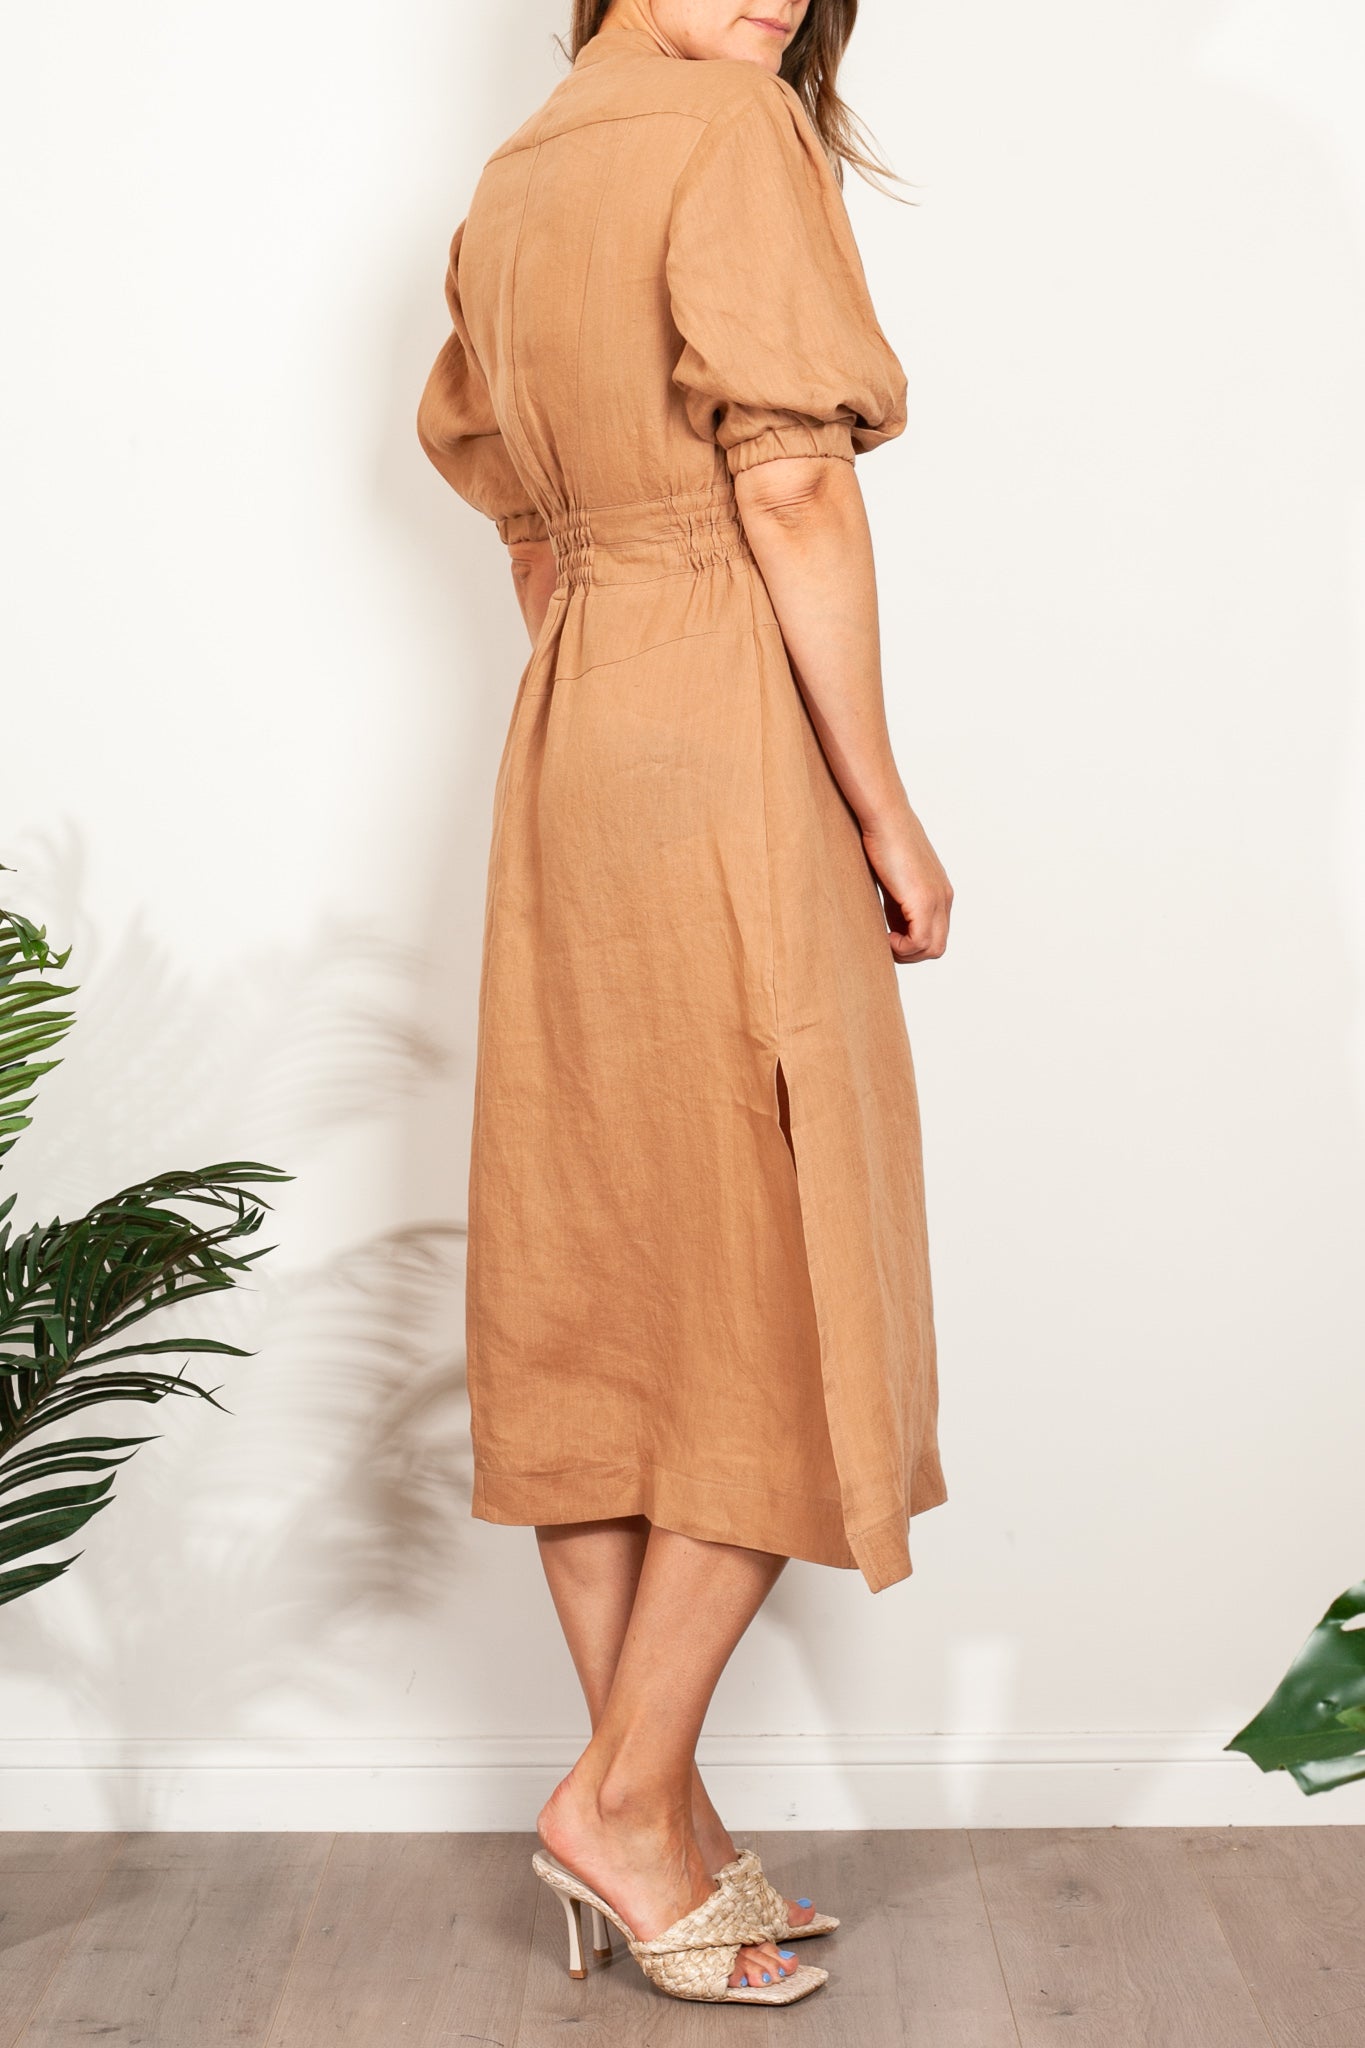 In the Sac Giselle Long Dress